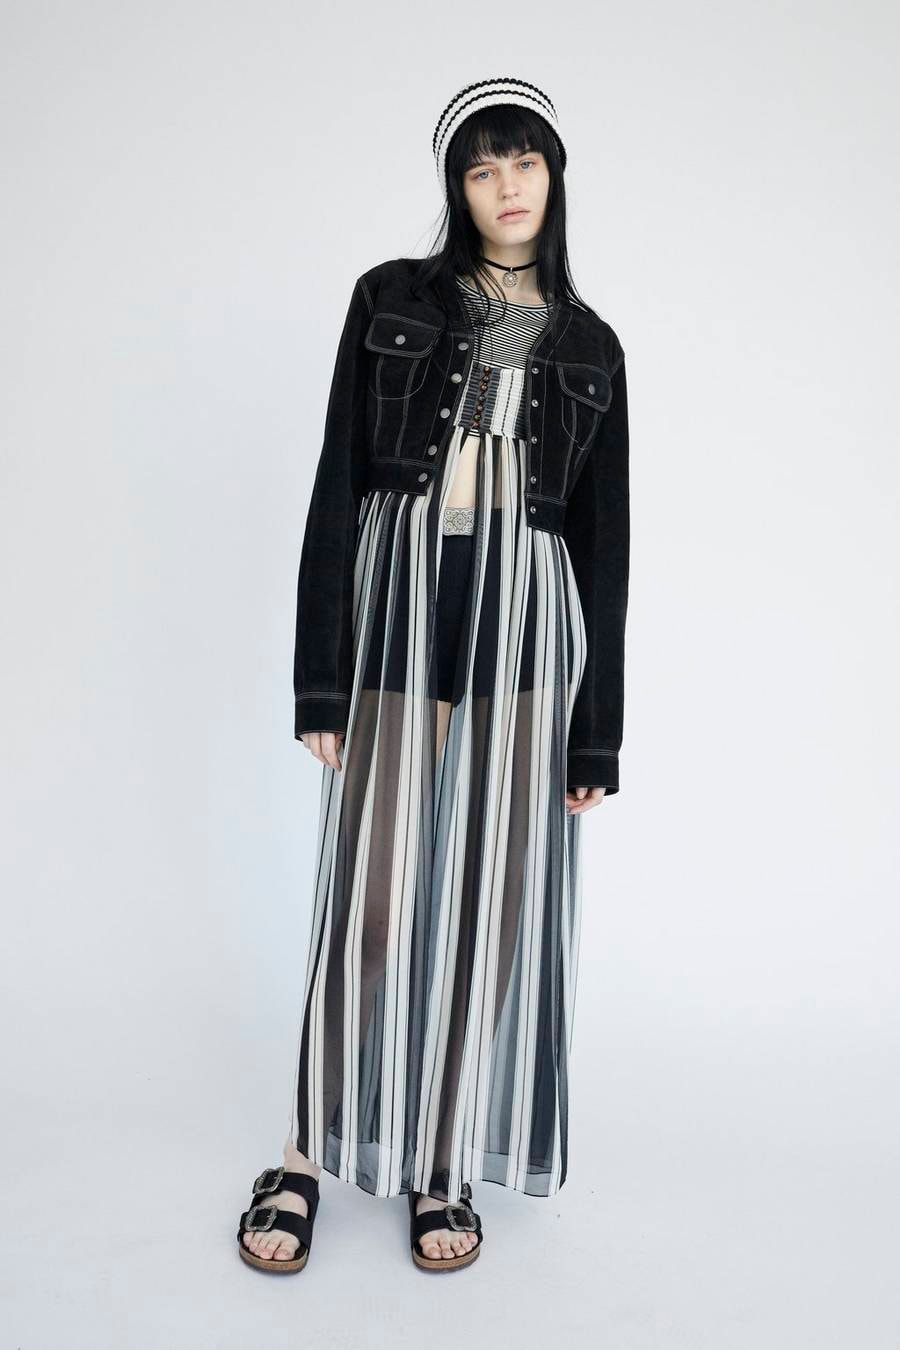 Marc Jacobs Resort 2019 Redux Collection Suede Cropped Jacket Striped Empire-Waist Chiffon Dress Stretch Pointelle Boy Short Black